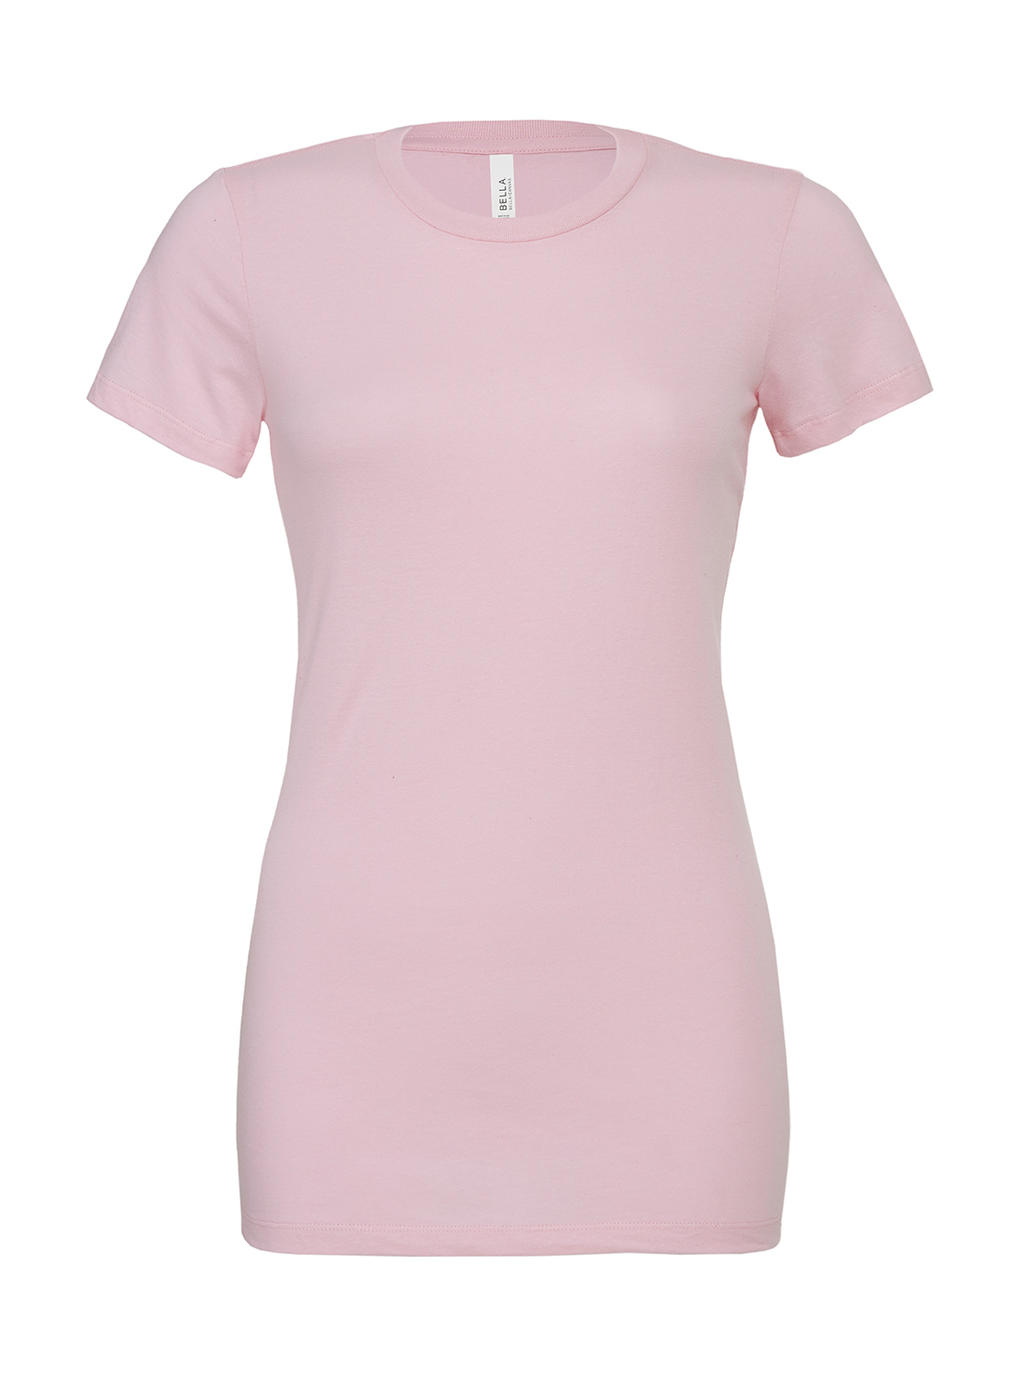  Womens Relaxed Jersey Short Sleeve Tee in Farbe Pink